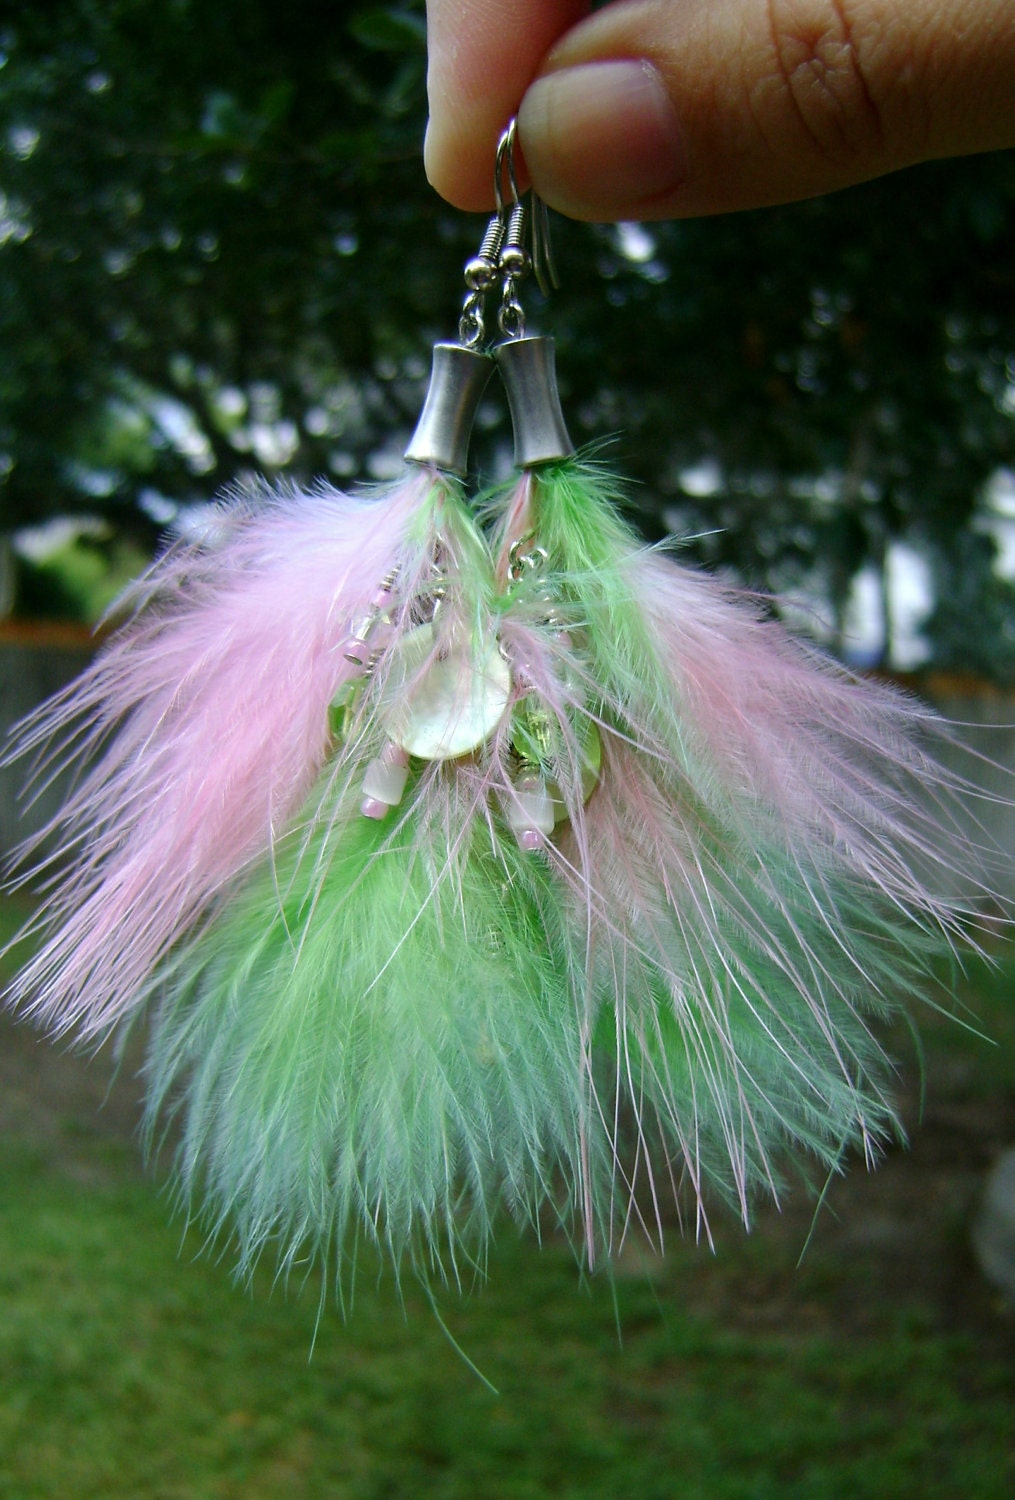 OOAK Punk Neon Pink and Green Feather Dangle Handmade Earrings FREE SHIPPING